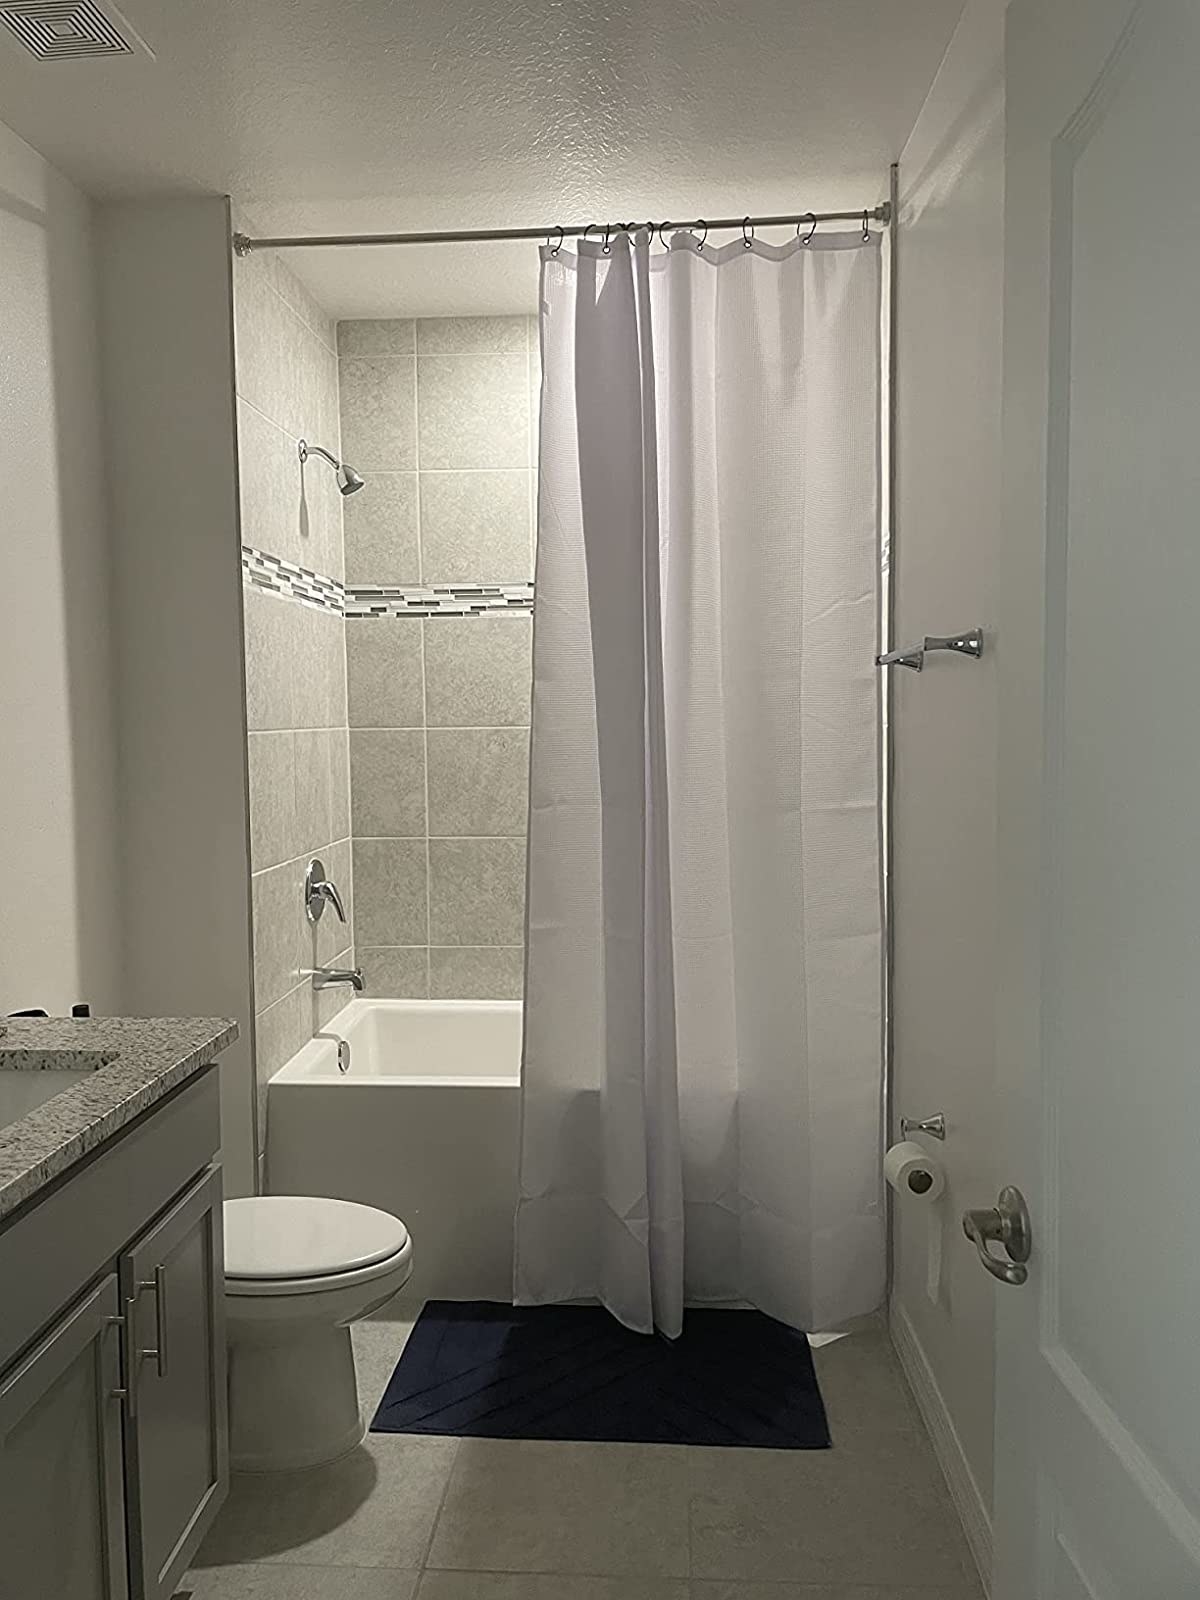 Reviewer image of white shower curtain hanging in their bathroom